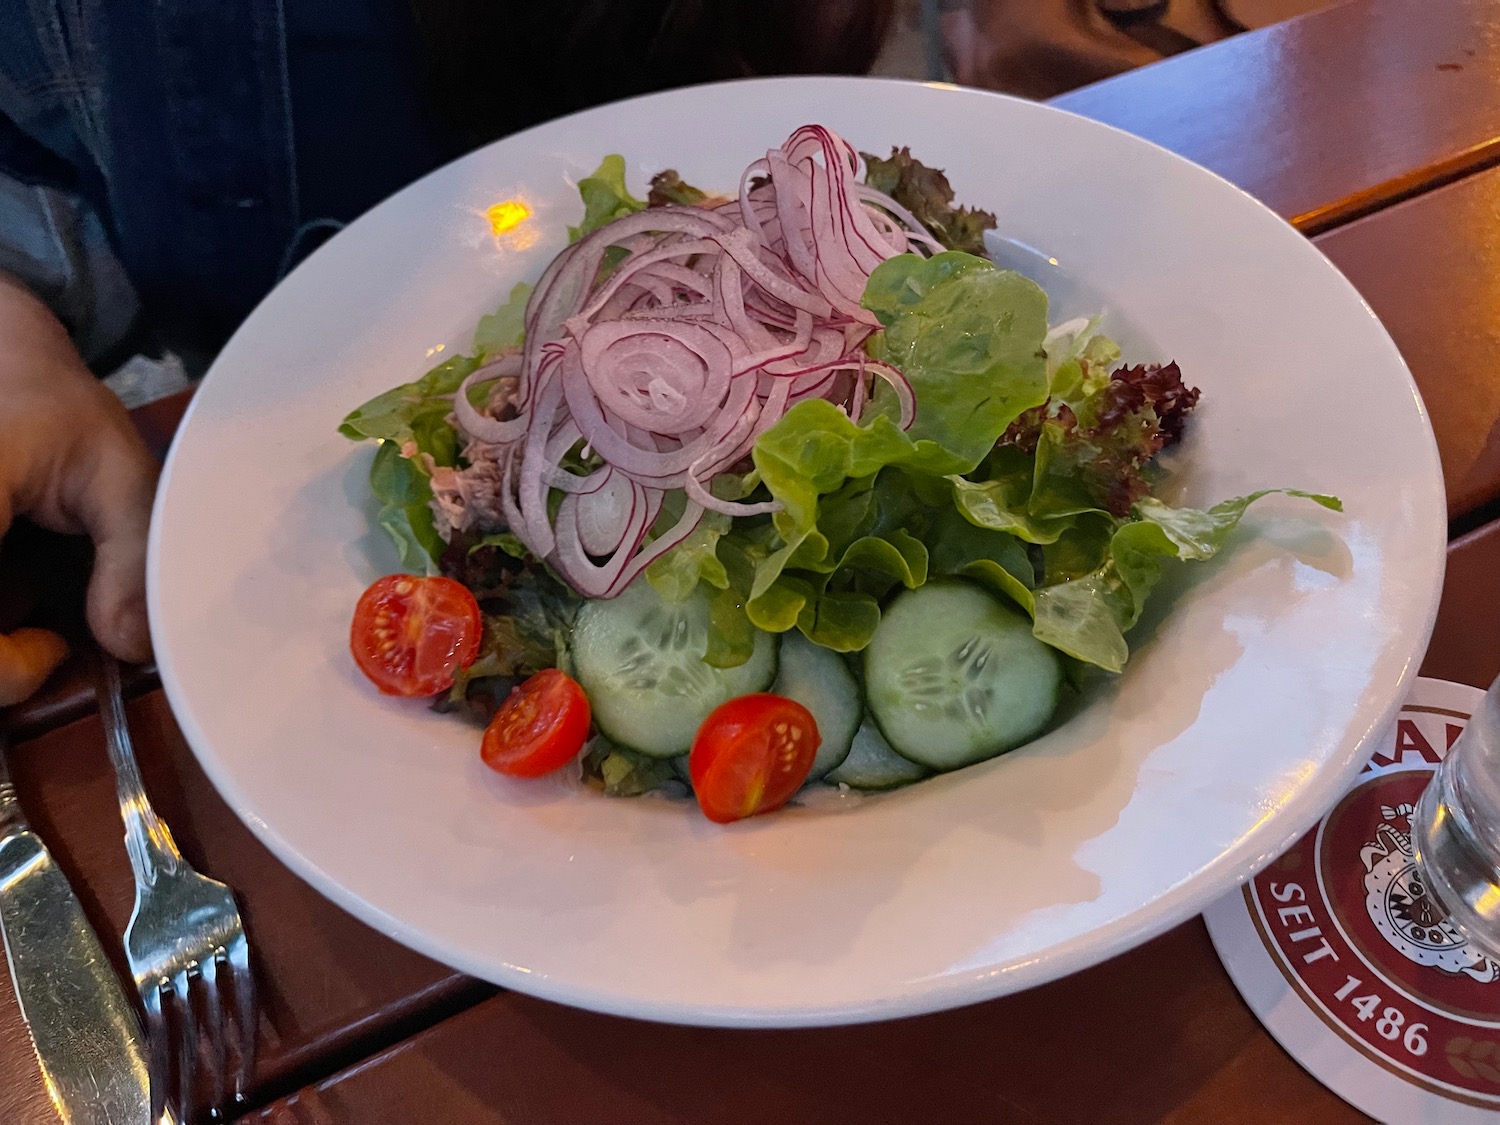 Am I The Solely One Who Loves German Meals? - Reside and Let's Fly | Digital Noch Digital Noch